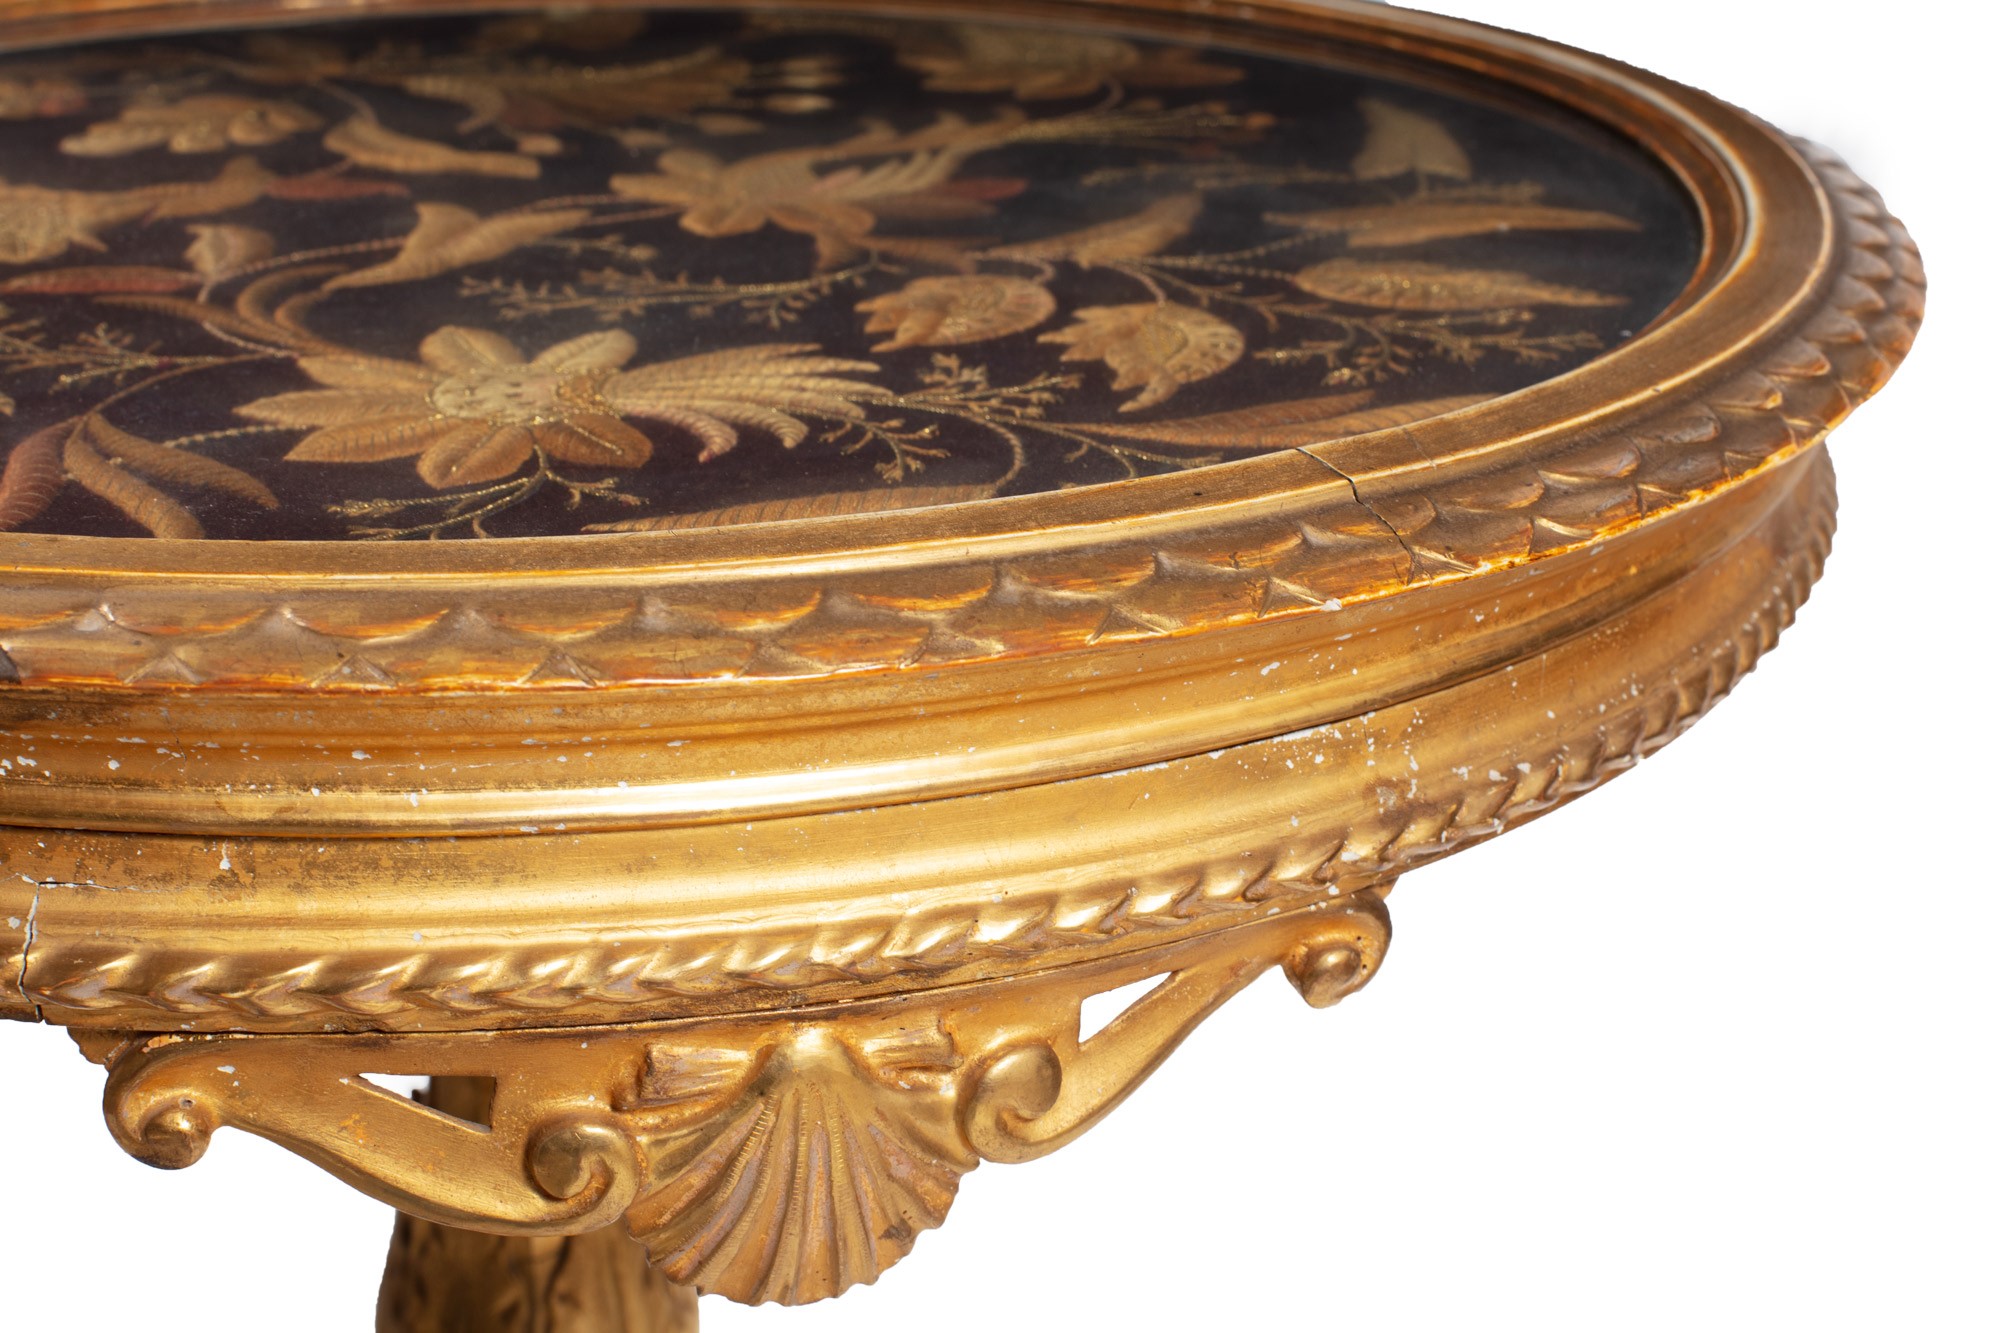 Carved and gilded wooden coffee table manifacture ligure, mid 19th century, with tripod base, - Image 5 of 8